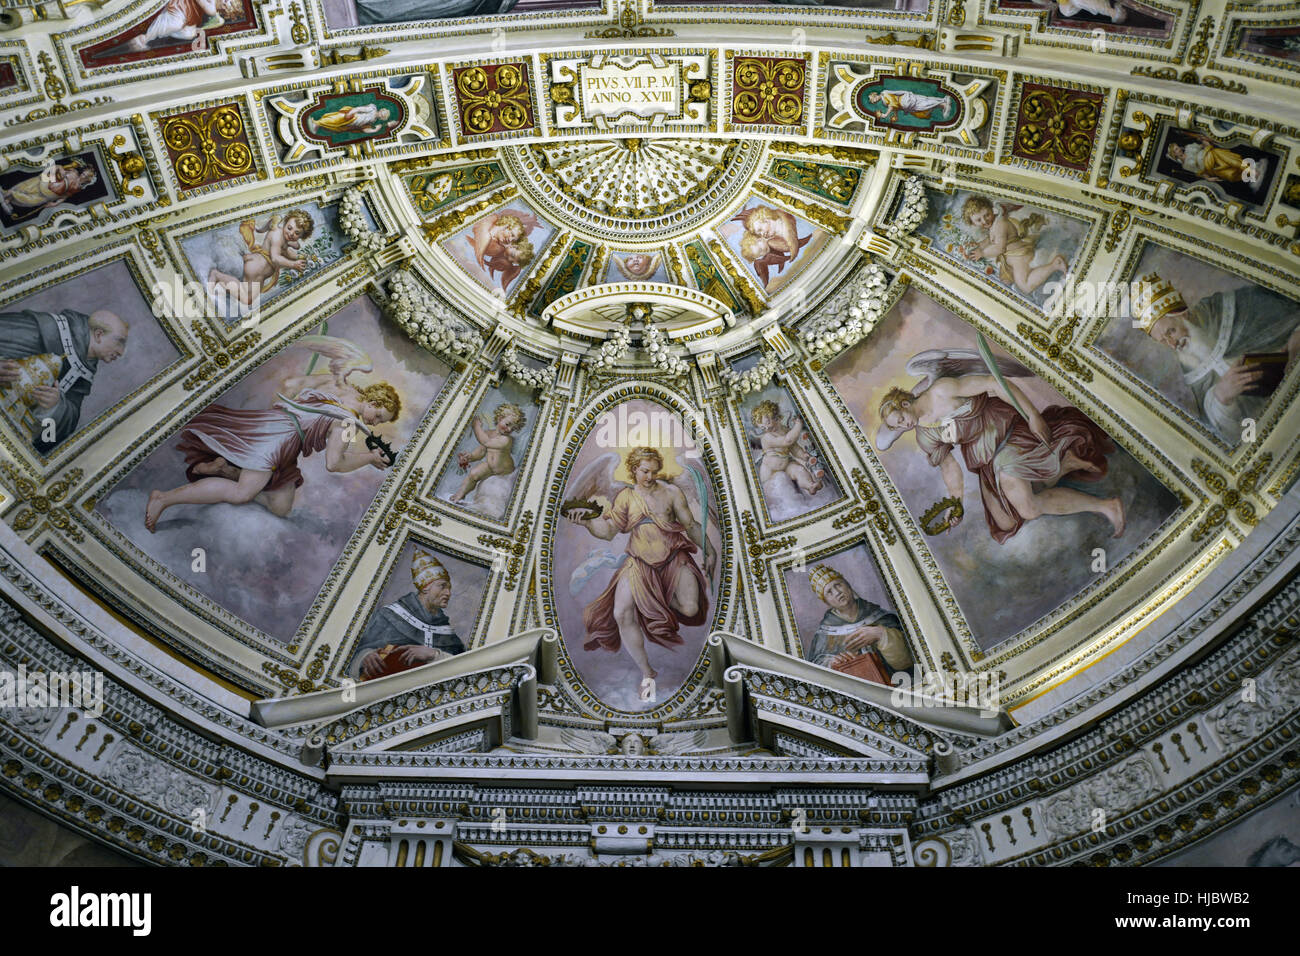 Ceiling Painting By Michelangelo Of The Last Judgement At